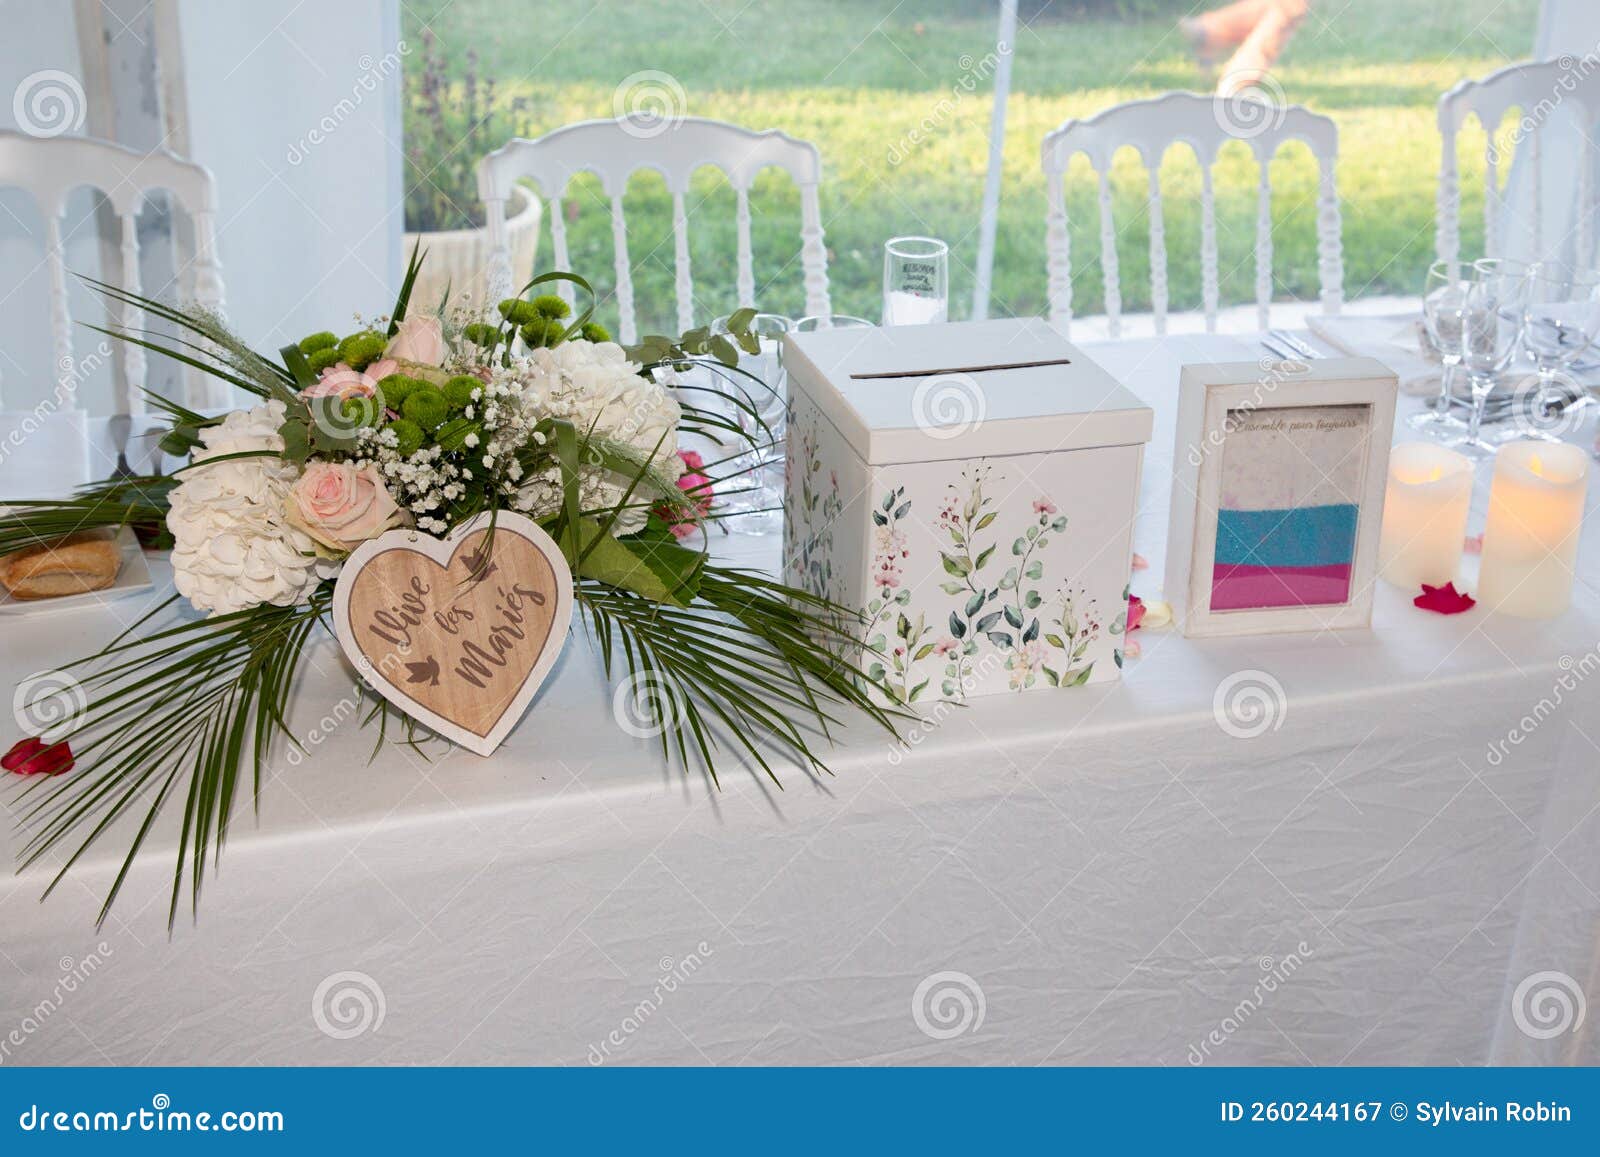 decorated wedding table with text french urn vive les maries means long live the bride and groom and sand box marked together